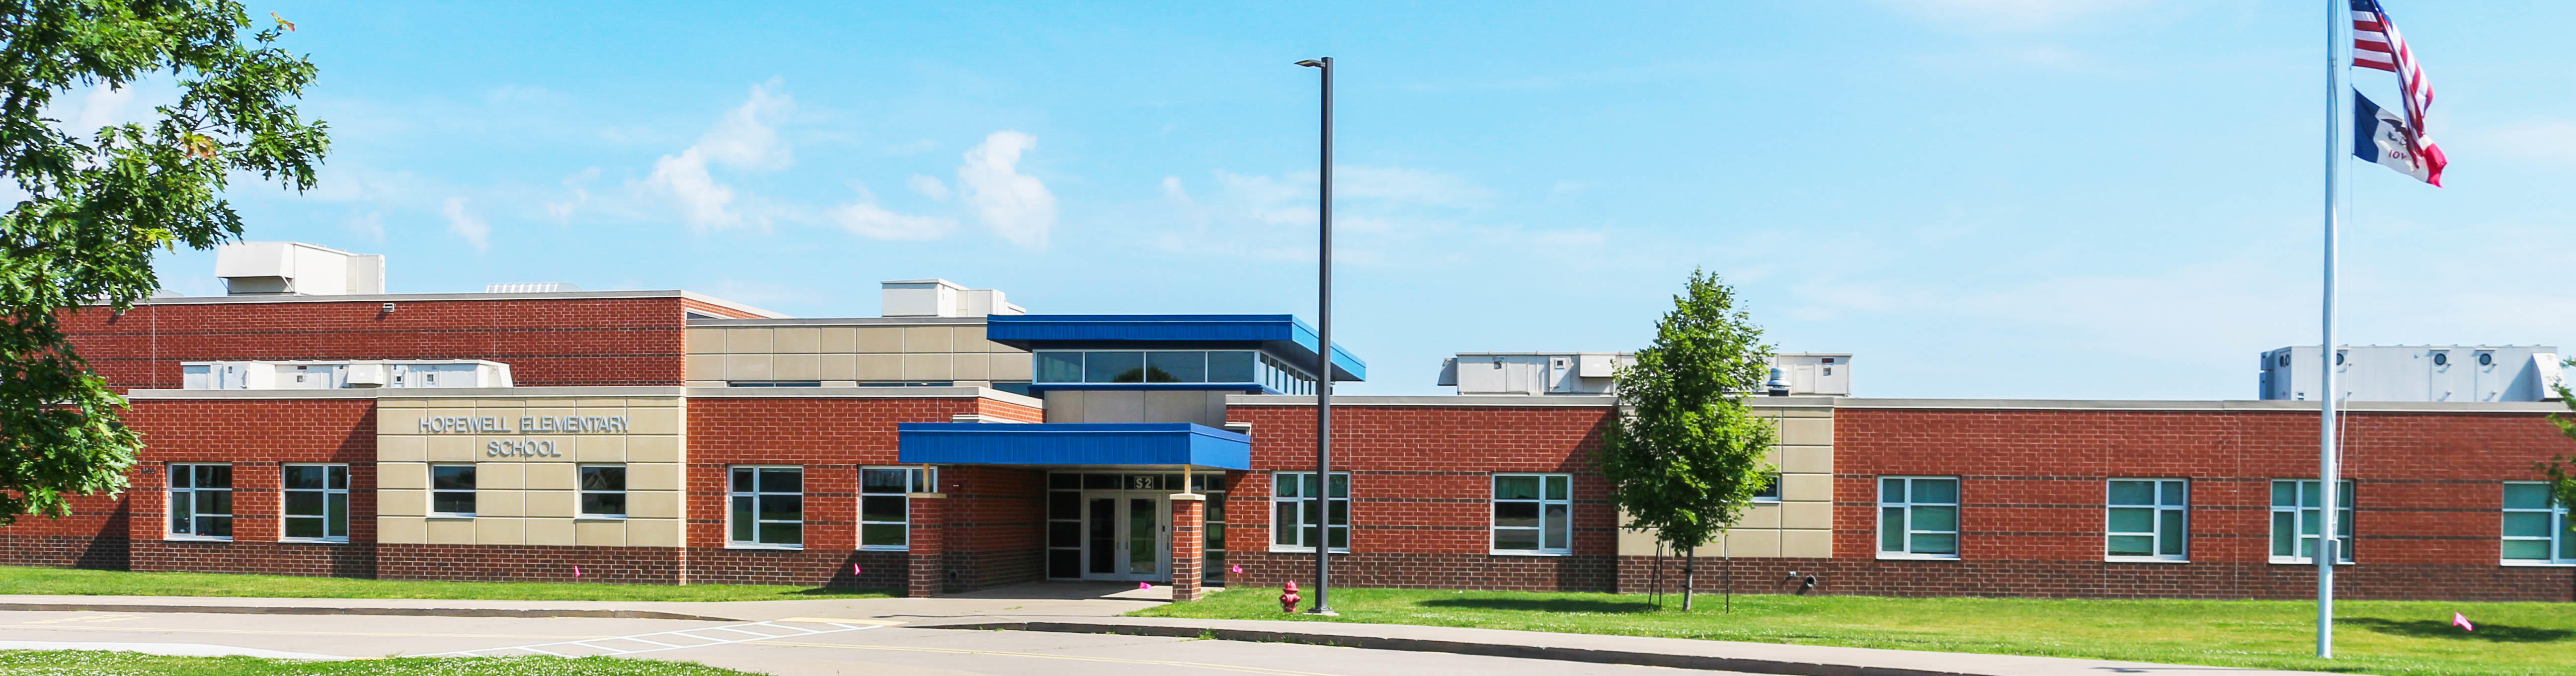 Hopewell Elementary Building